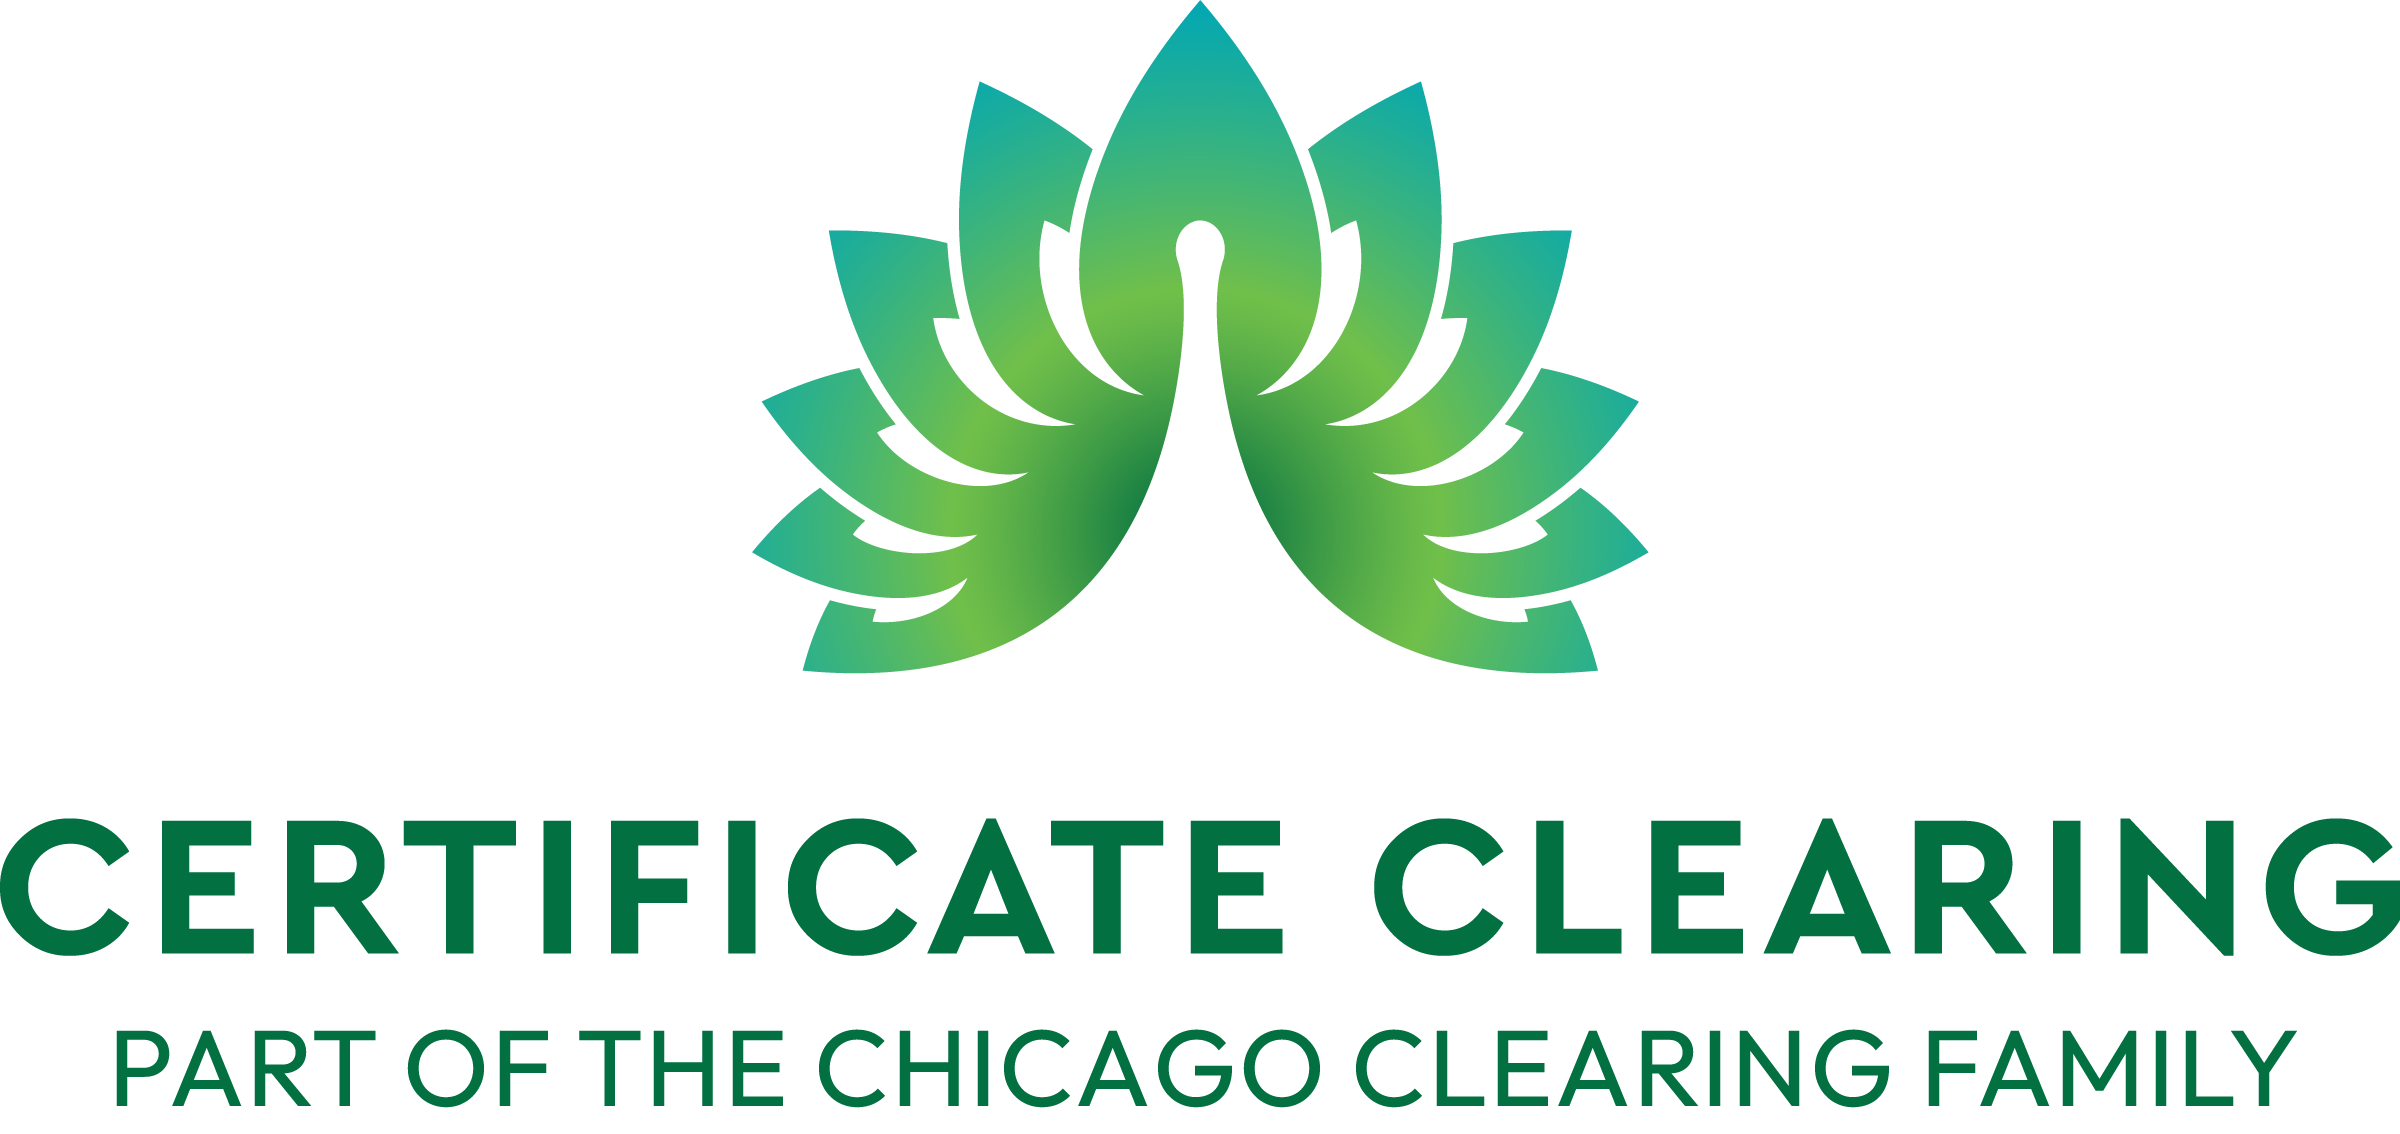 Certificate Clearing Corporation